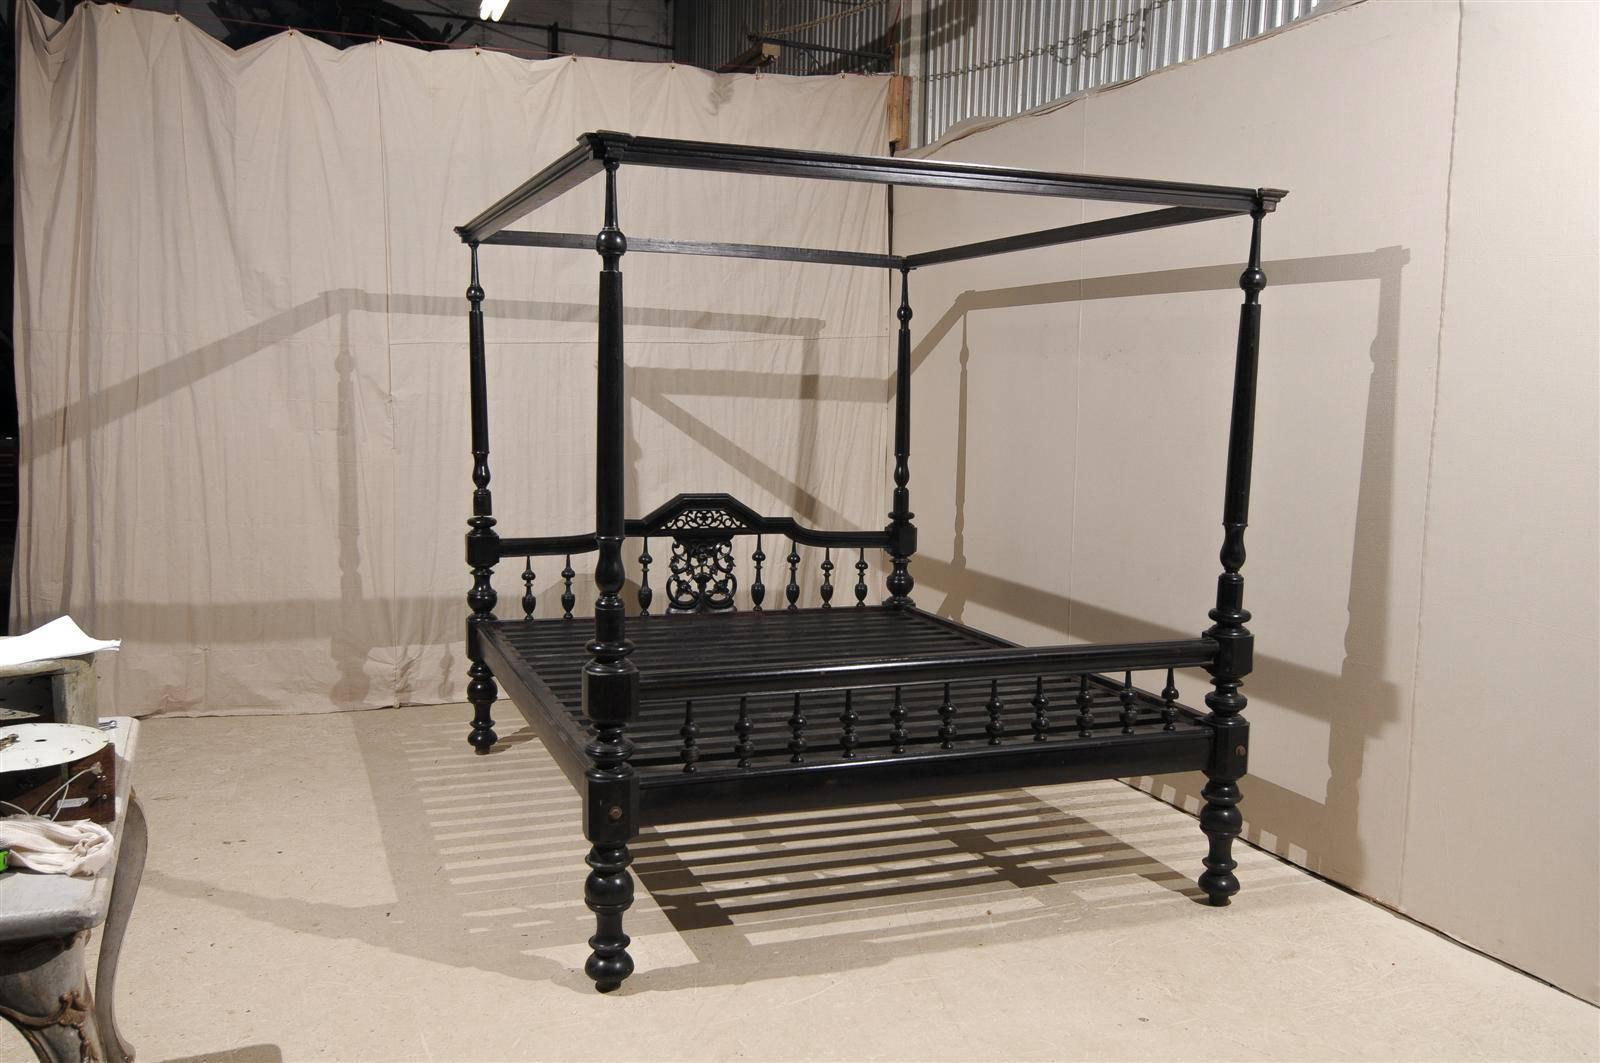 An antique anglo-indian black four post canopy style bed with turned legs and balusters. The headboard features some intricate carving with C-scrolls and foliage depictions in its center. The bed is also has some red undertone coming through.This